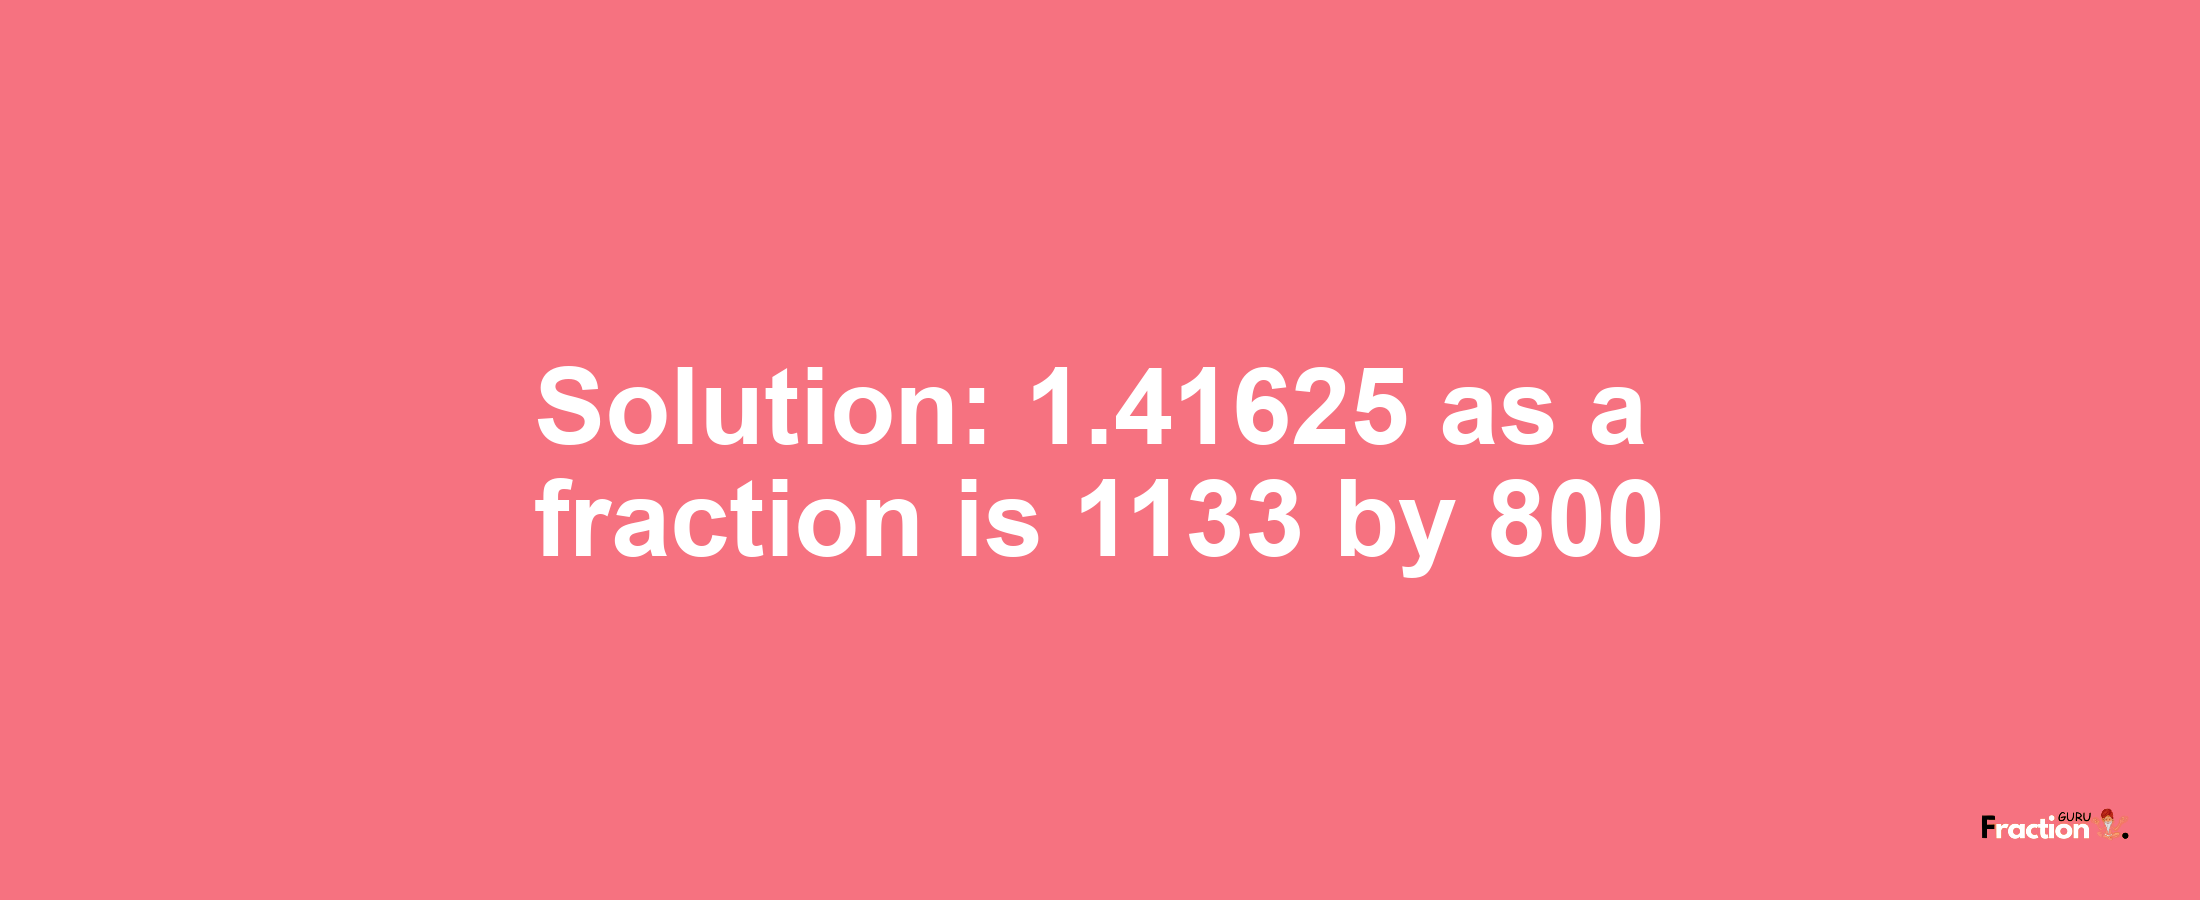 Solution:1.41625 as a fraction is 1133/800